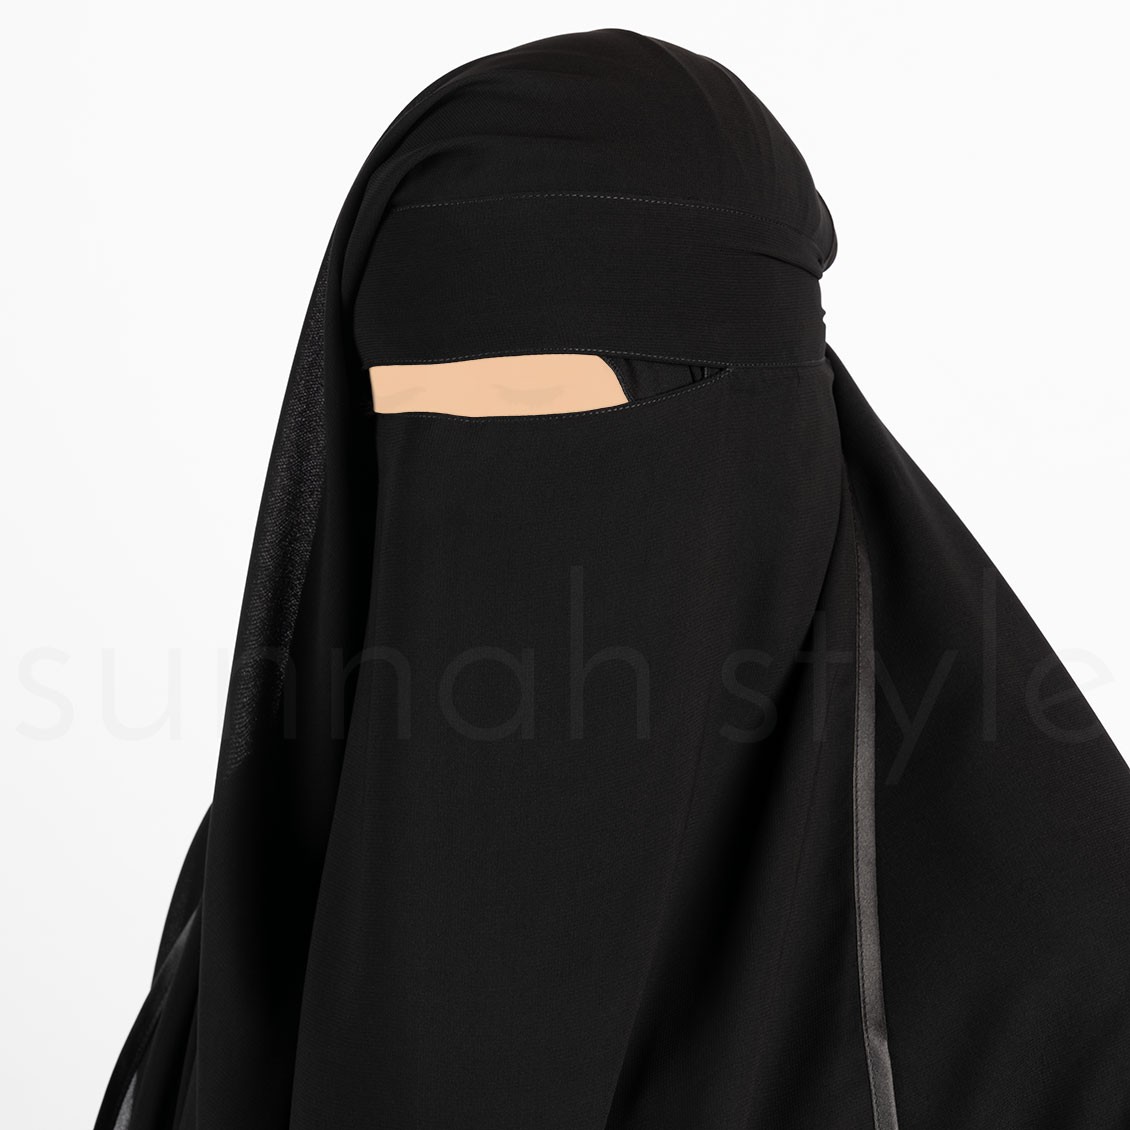 Sunnah Style Satin Trimmed Butterfly Niqab Black